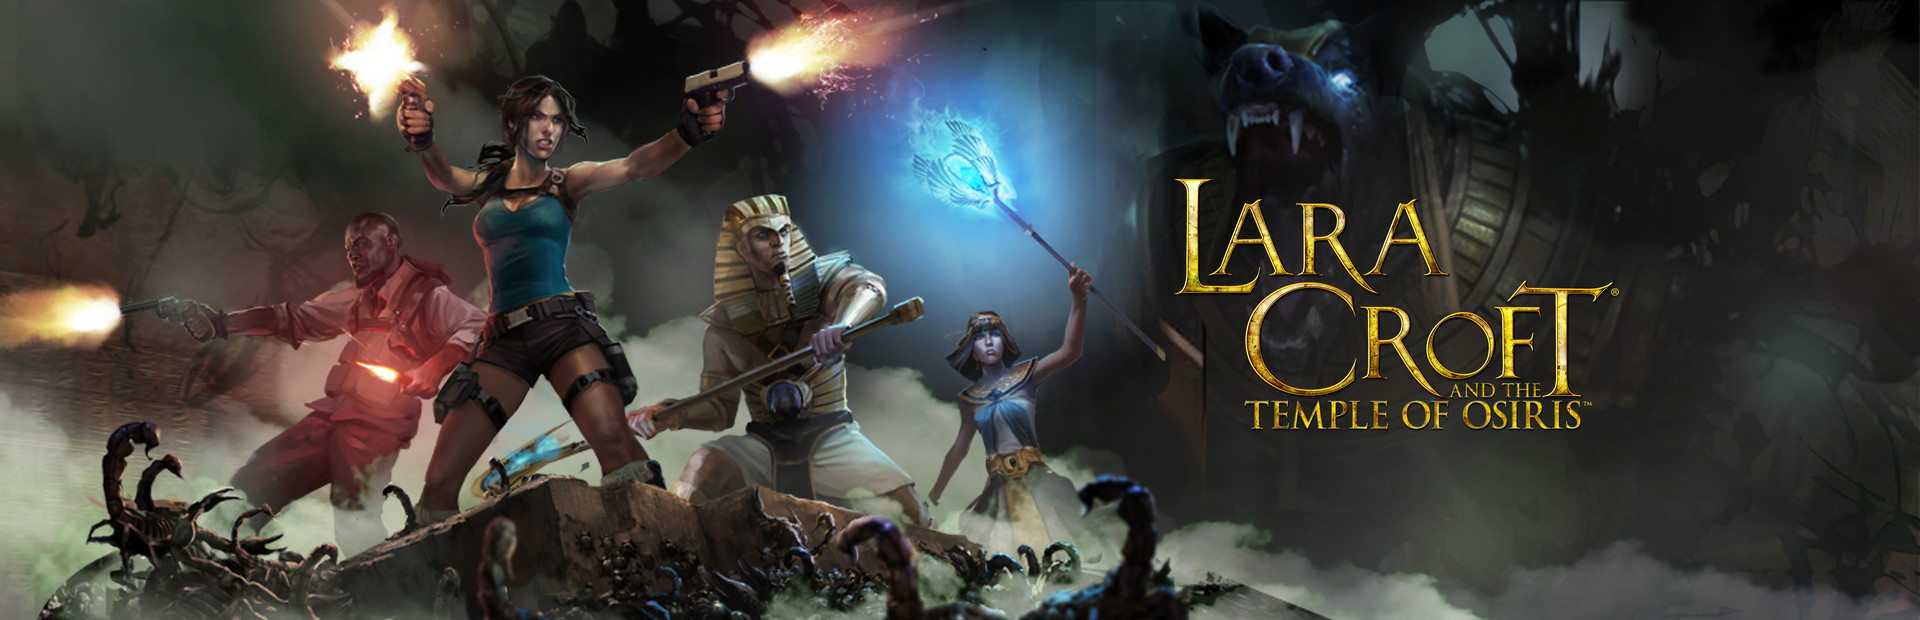 LARA CROFT AND THE TEMPLE OF OSIRIS™ cover image